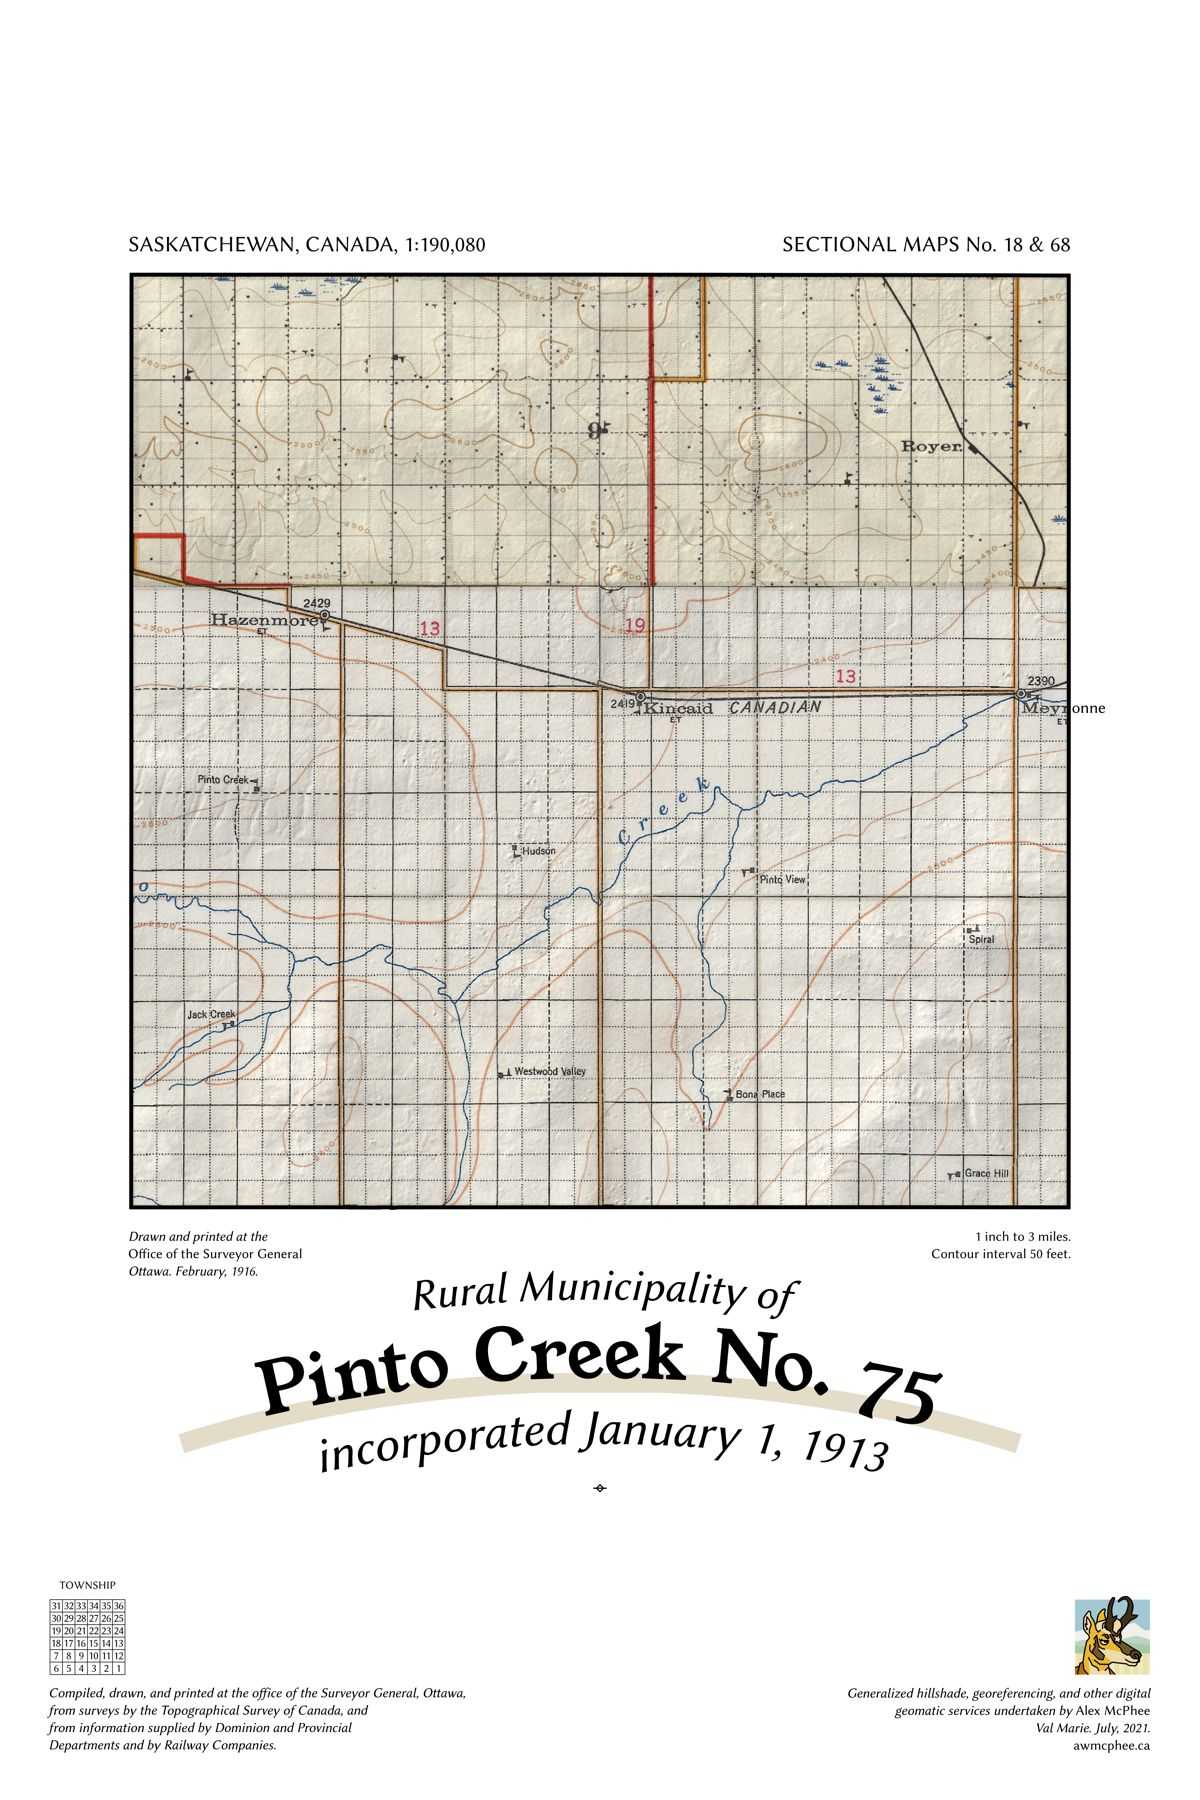 A map of the Rural Municipality of Pinto Creek No. 75.